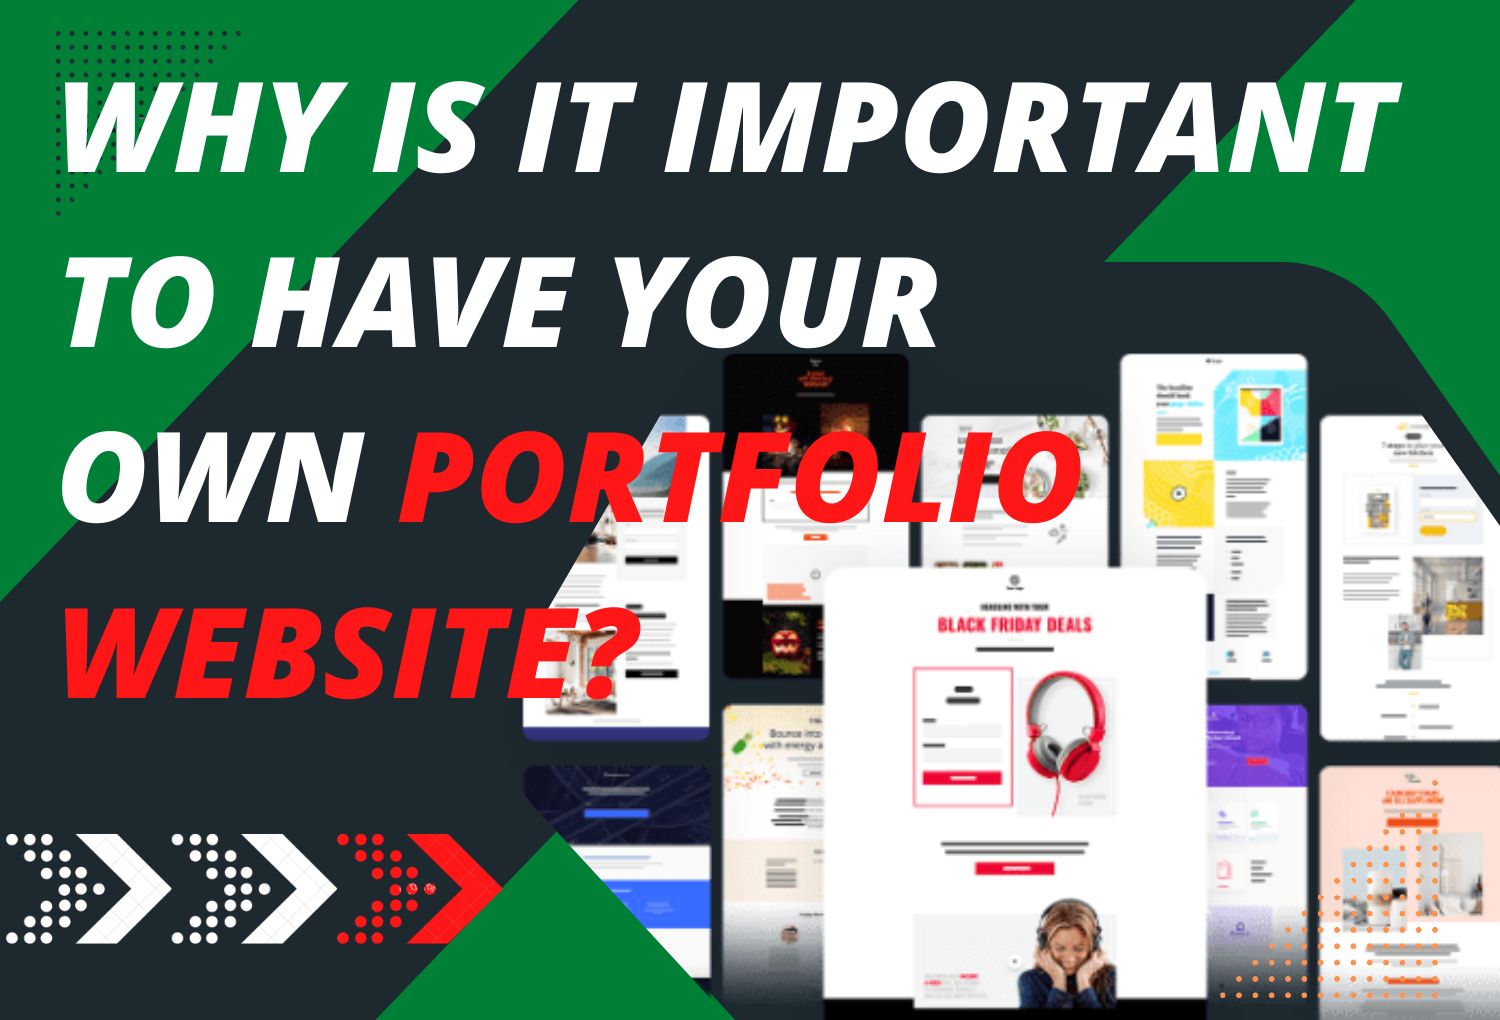 Why is it important to have your own portfolio website?